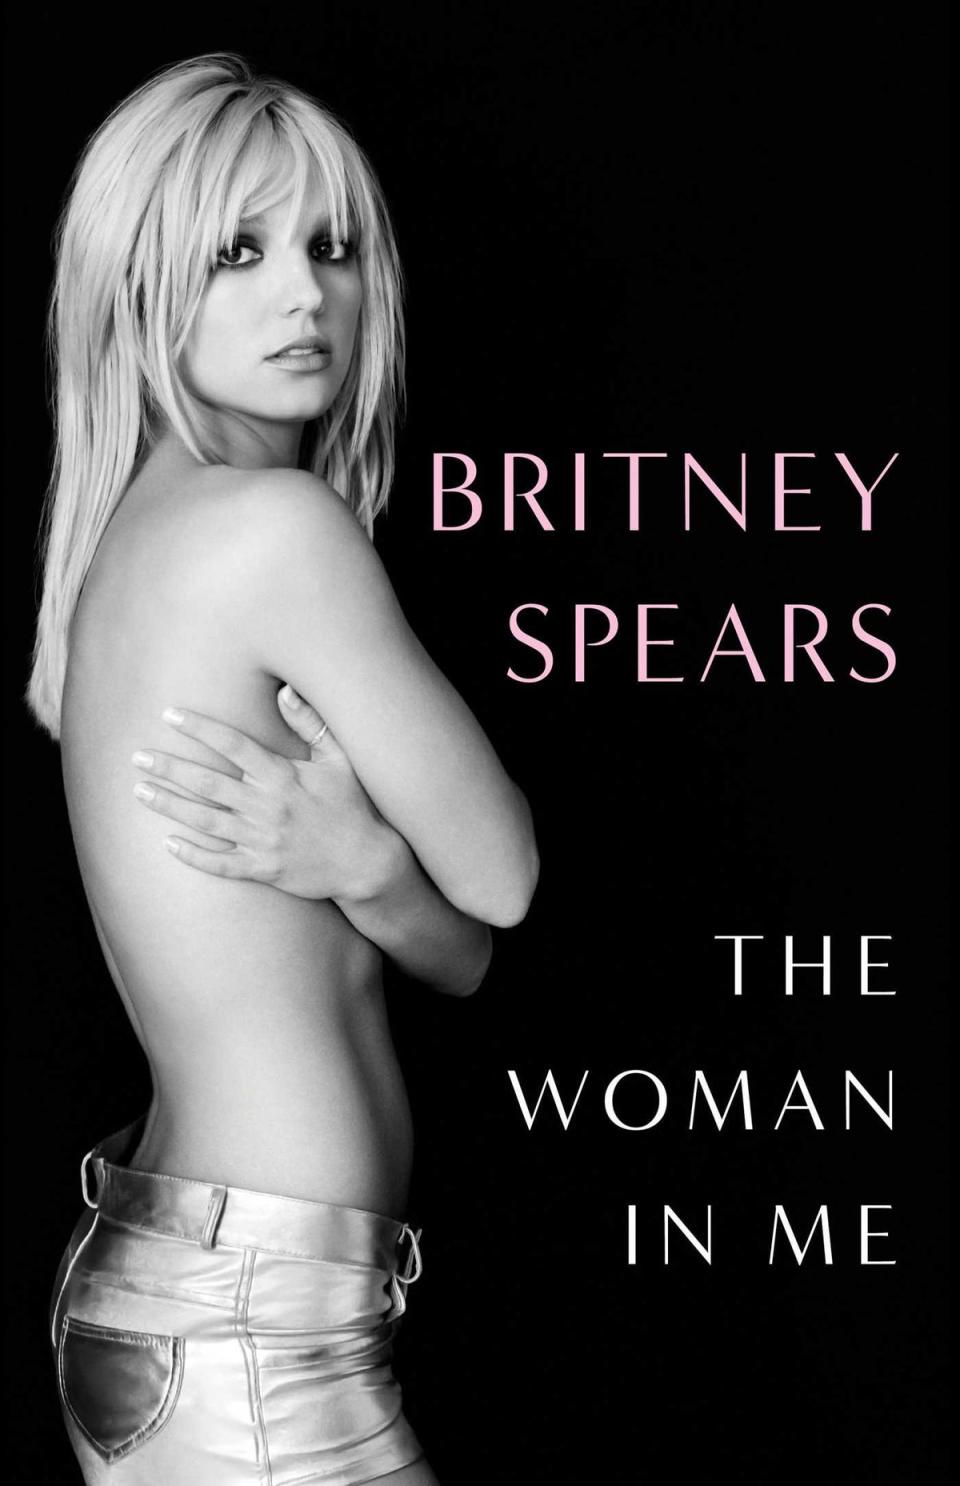 Cover girl: the artwork for Spears’s much-anticipated memoir ‘The Woman in Me’ (Simon & Schuster)